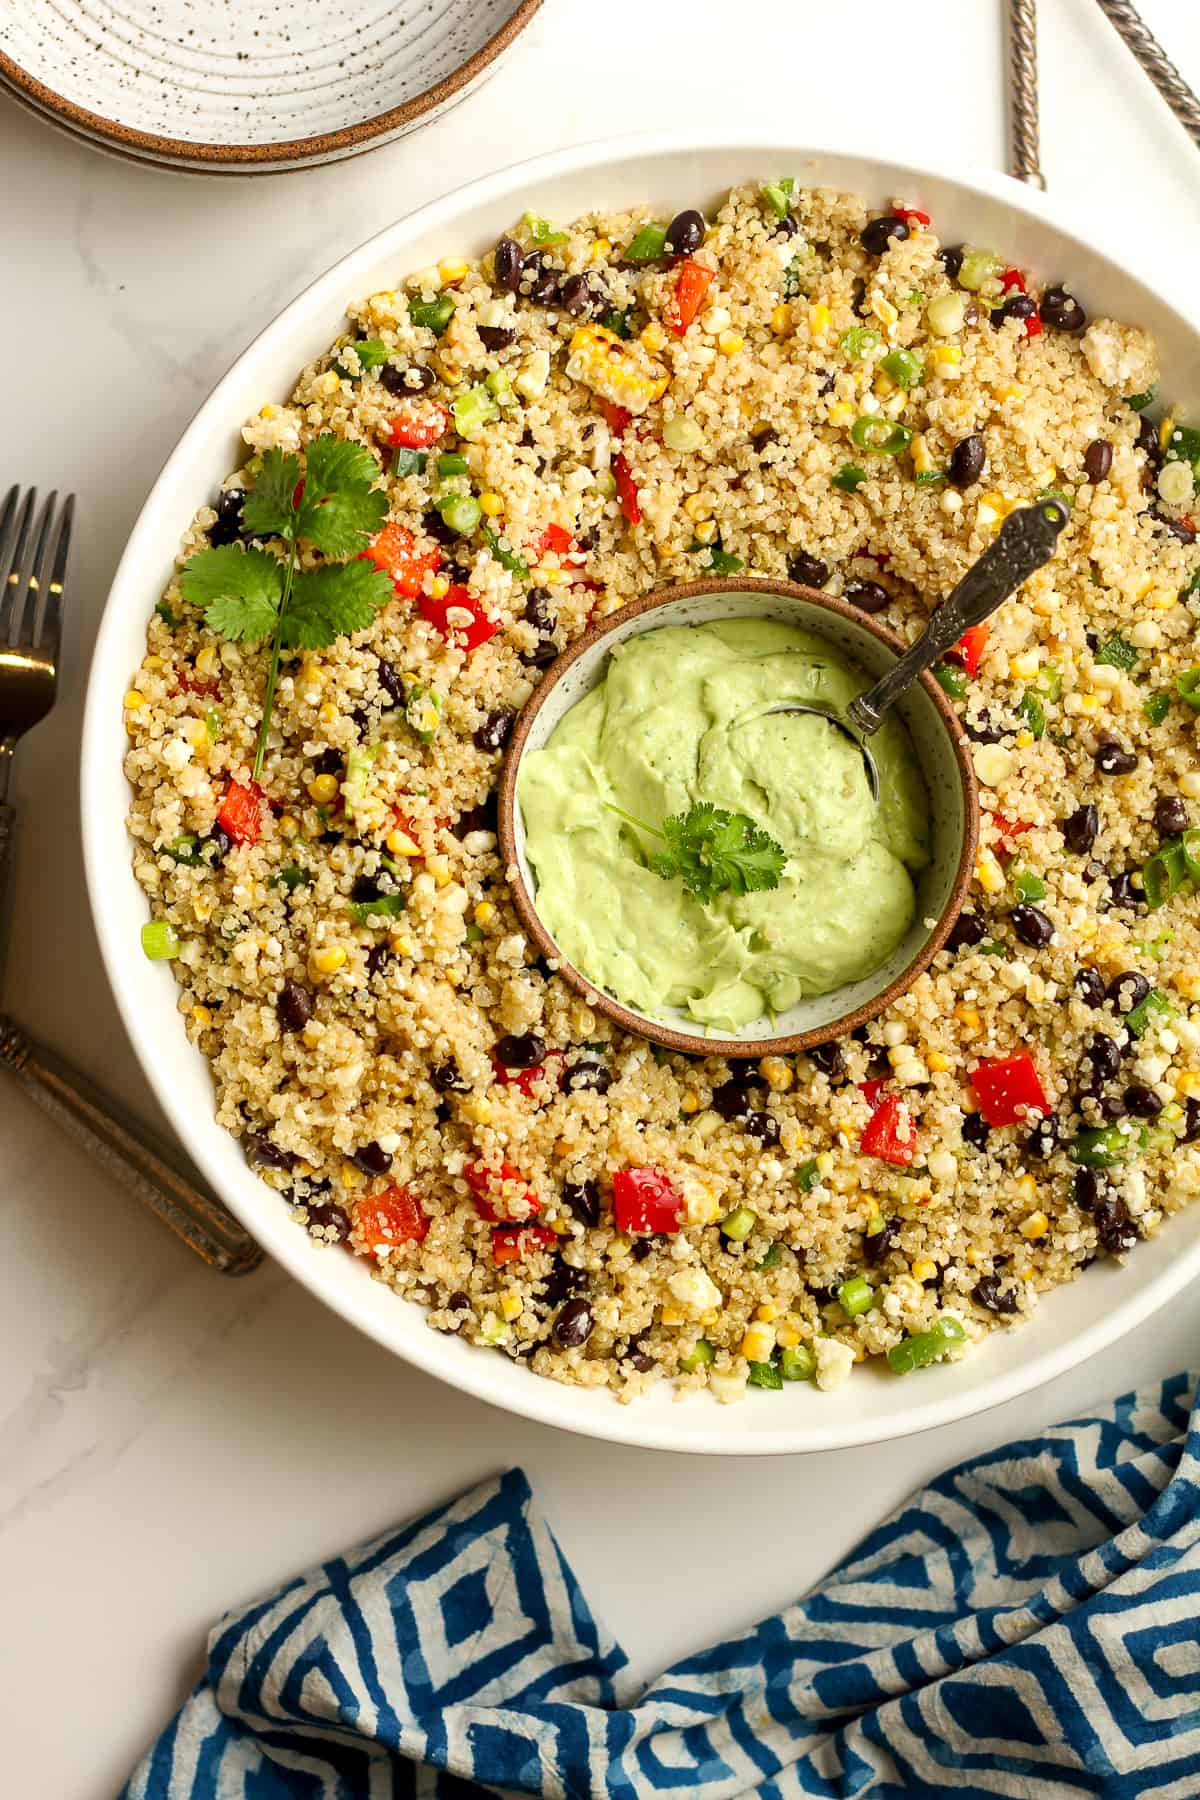 A large white salad bowl with the quinoa salad and a small bowl of avocado crema inside the bowl.